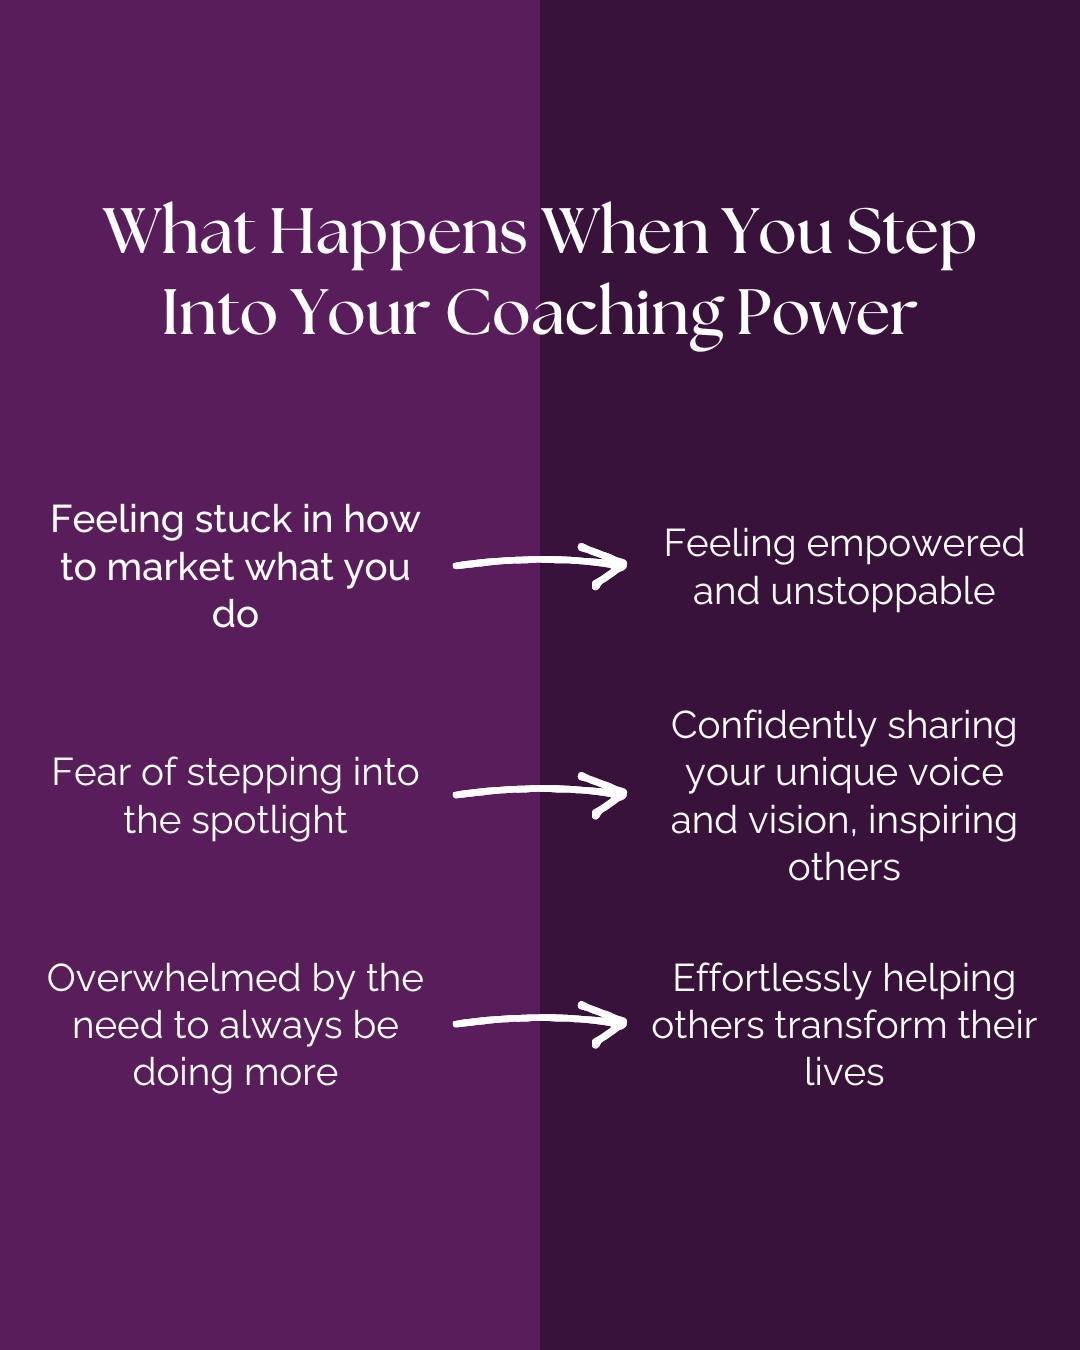 Wanna know how I've built my entire coaching business? By having confidence in my coaching and focusing on nothing other than my burning desire to help people.

All the marketing and messaging? I didn't know ANY of what I know now while I was making 